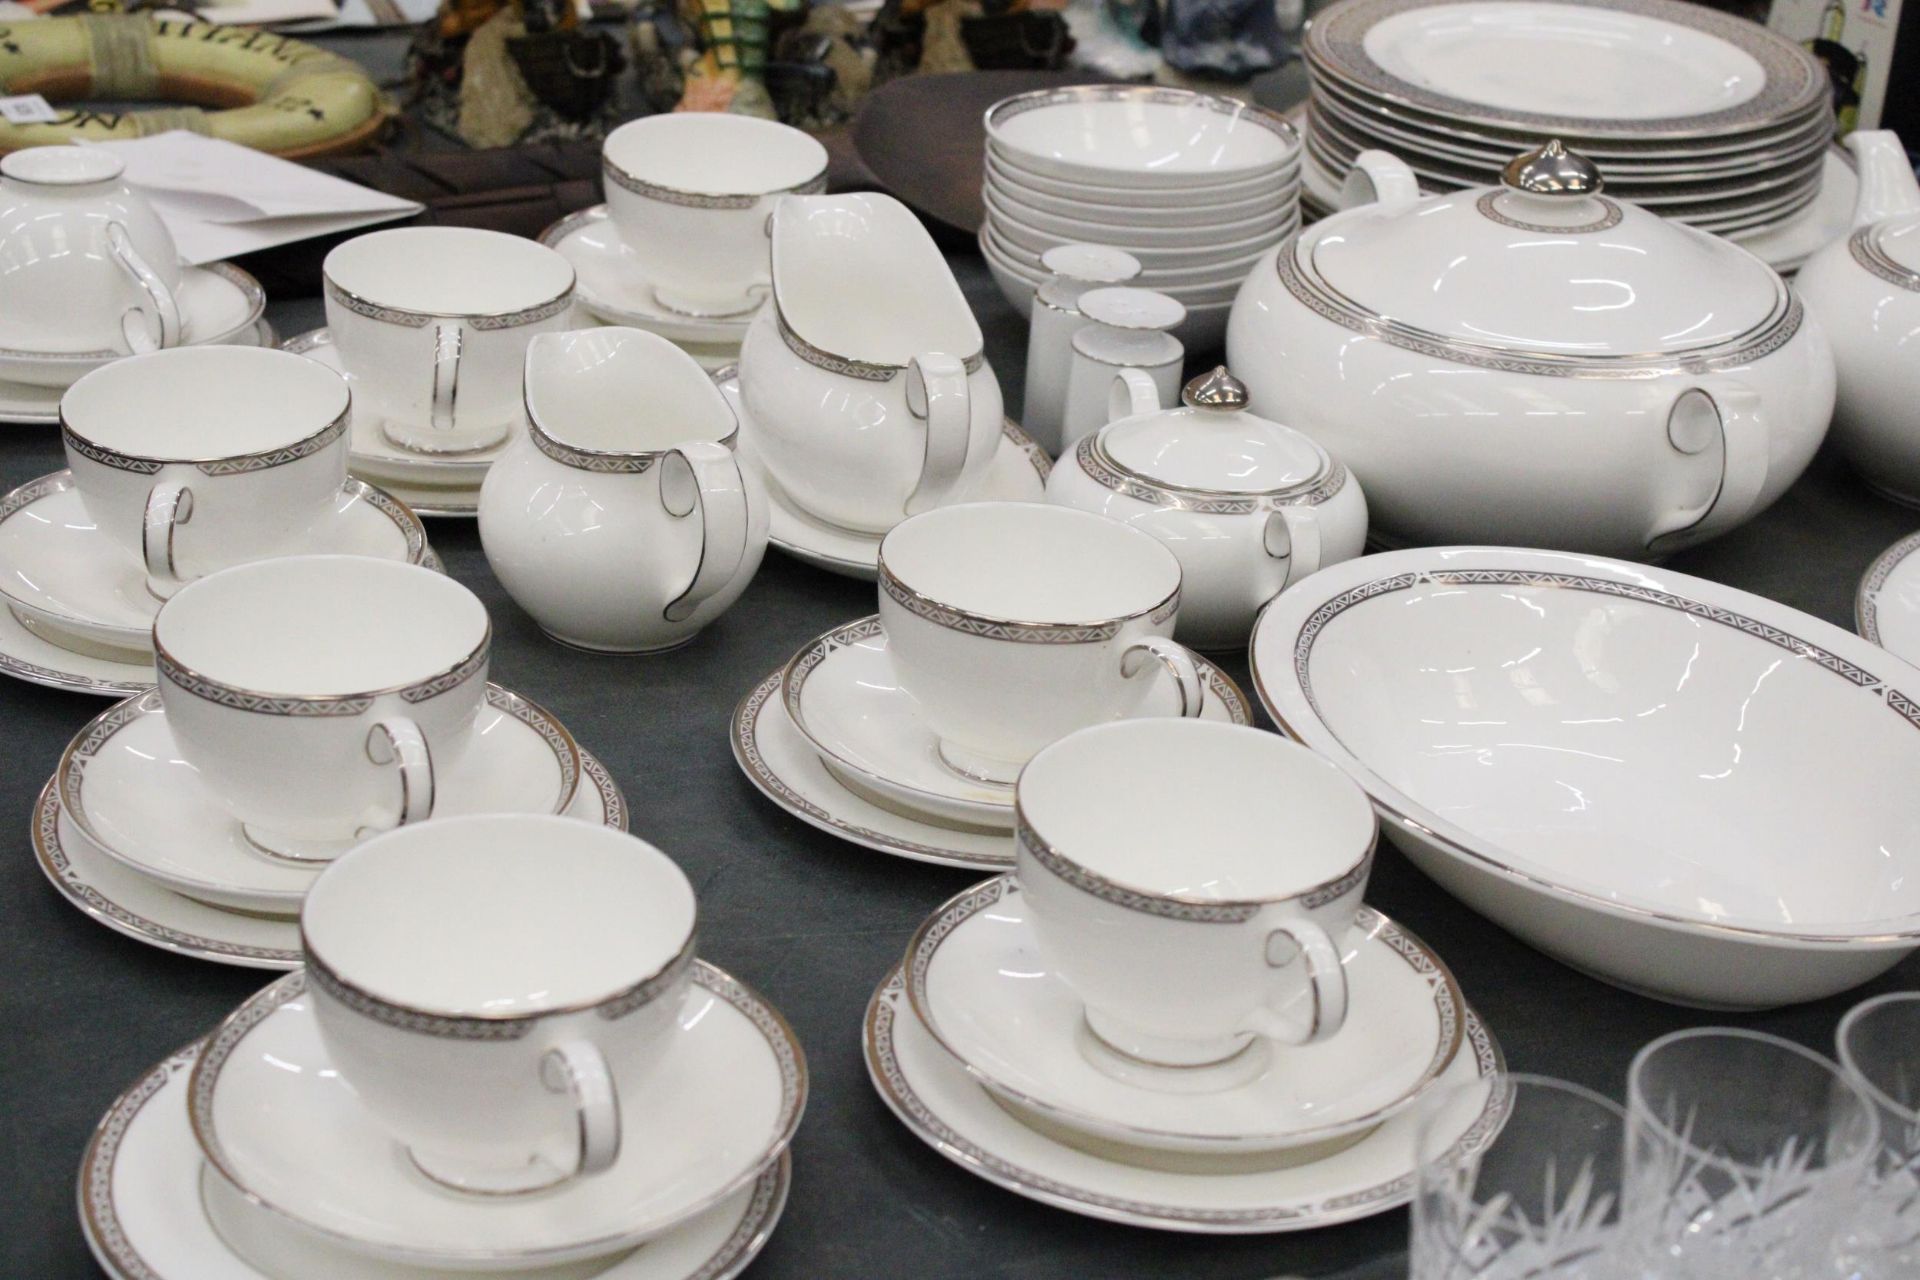 A ROYAL DOULTON 'DRYDEN' DINNER SERVICE TO INCLUDE SERVING BOWLS, VARIOUS SIZES OF PLATES, DESSERT - Image 6 of 6